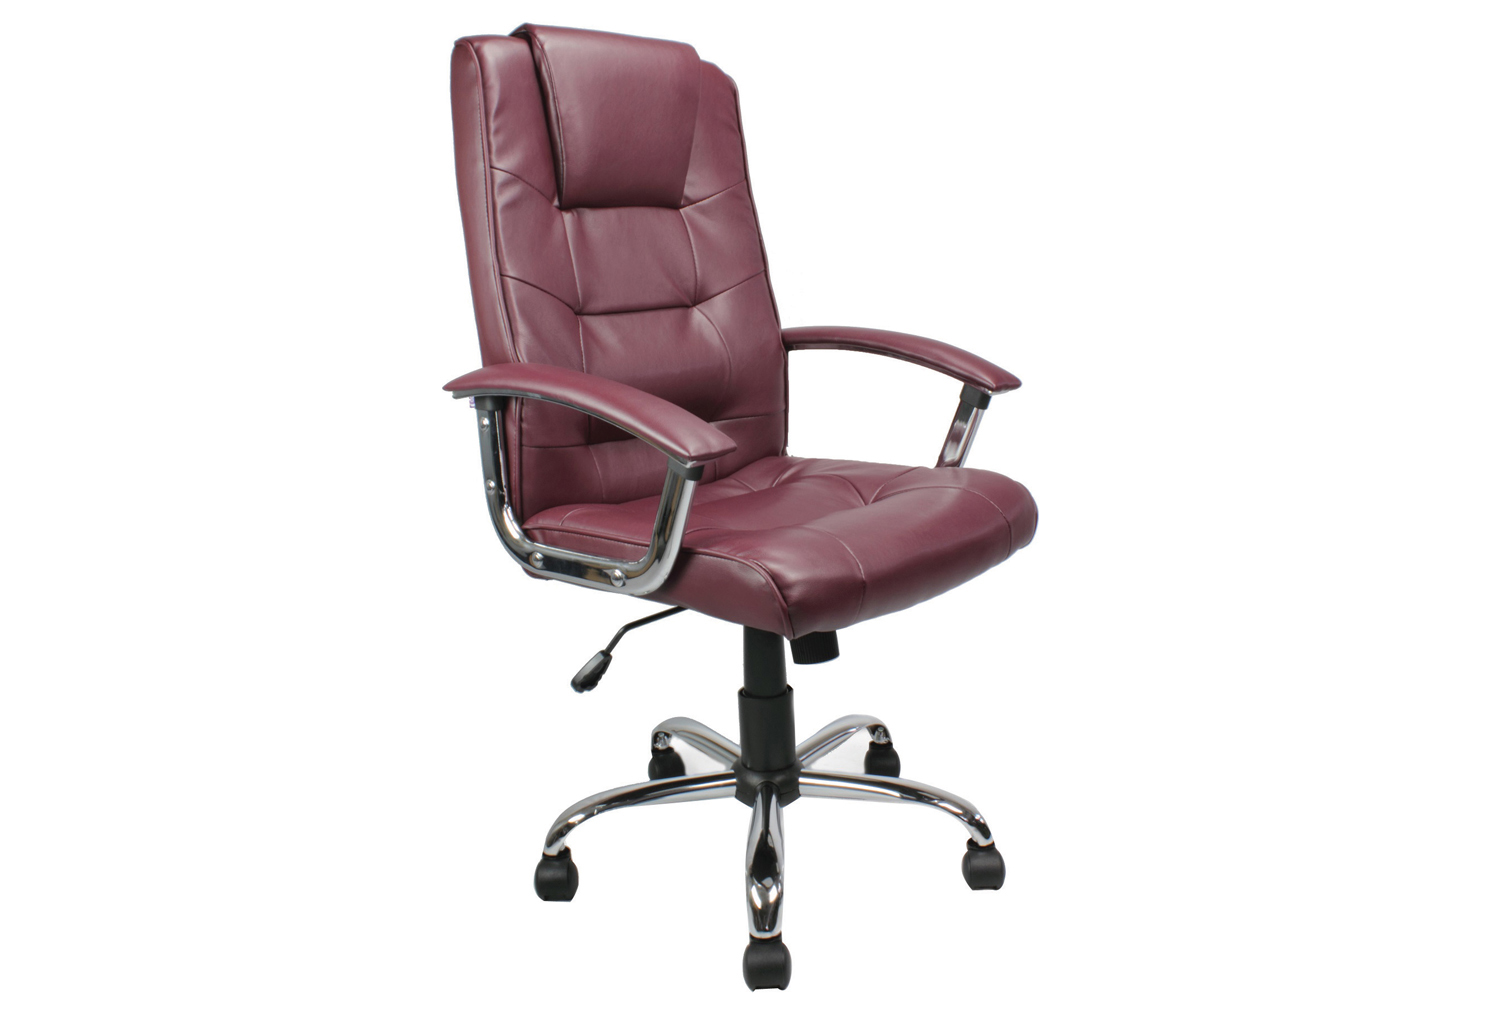 Skye High Back Burgundy Leather Faced Executive Office Chair, Burgundy, Fully Installed